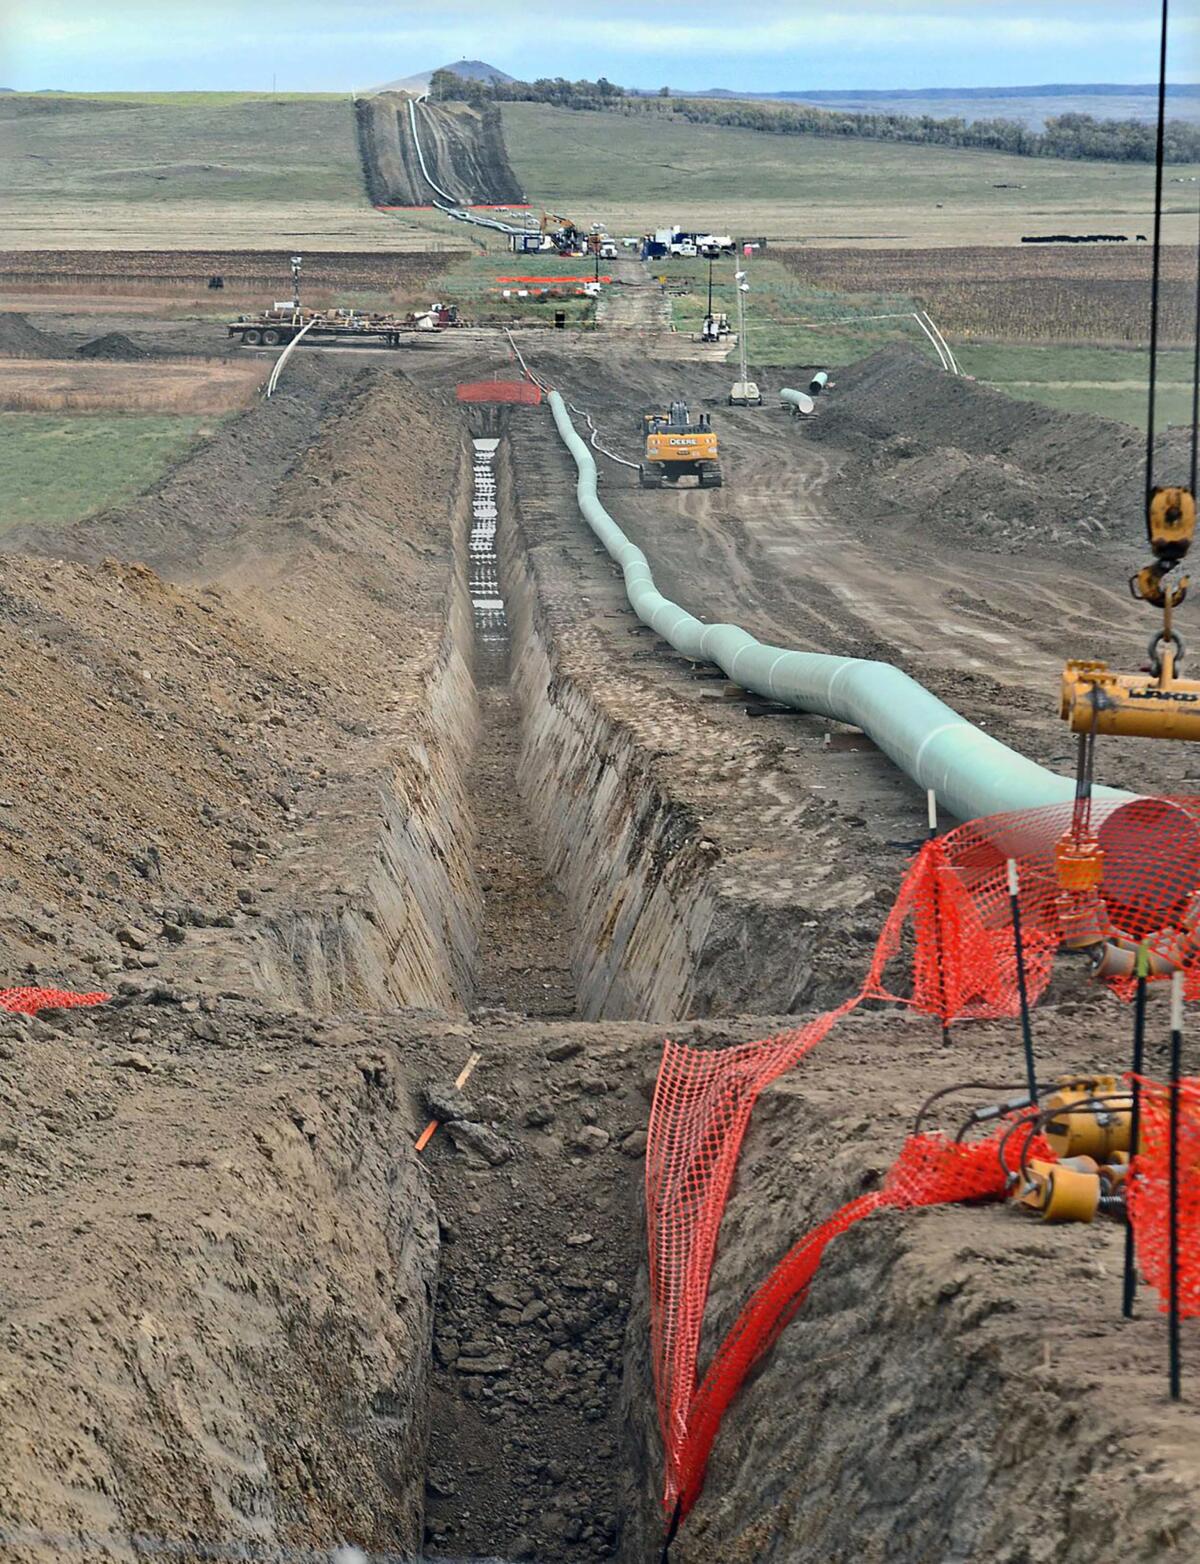 FILE - In this October 2016 file photo, construction continues on the Dakota Access pipeline. A hearing was scheduled for Friday, April 9, 2021, to determine whether the Dakota Access oil pipeline should be allowed to continue operating without a key permit while the U.S. Army Corps of Engineers conducts an environmental review on the project. (Tom Stromme/The Bismarck Tribune via AP, File)